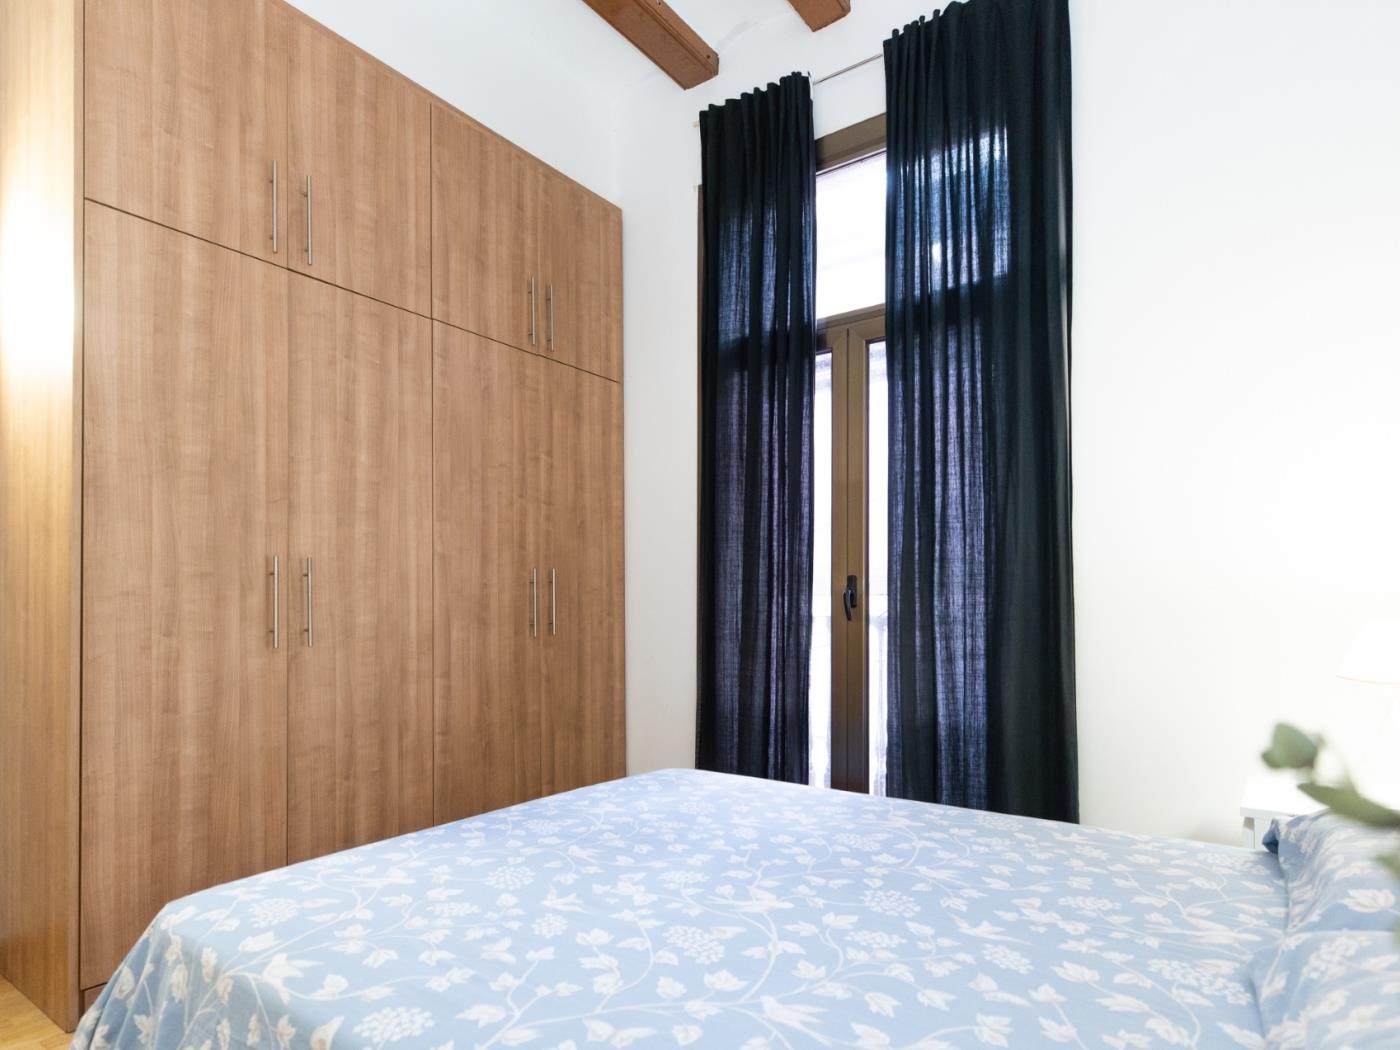 Ideal apartment in the city centre in the Ghotic Quarter ideal for couples - My Space Barcelona Apartments